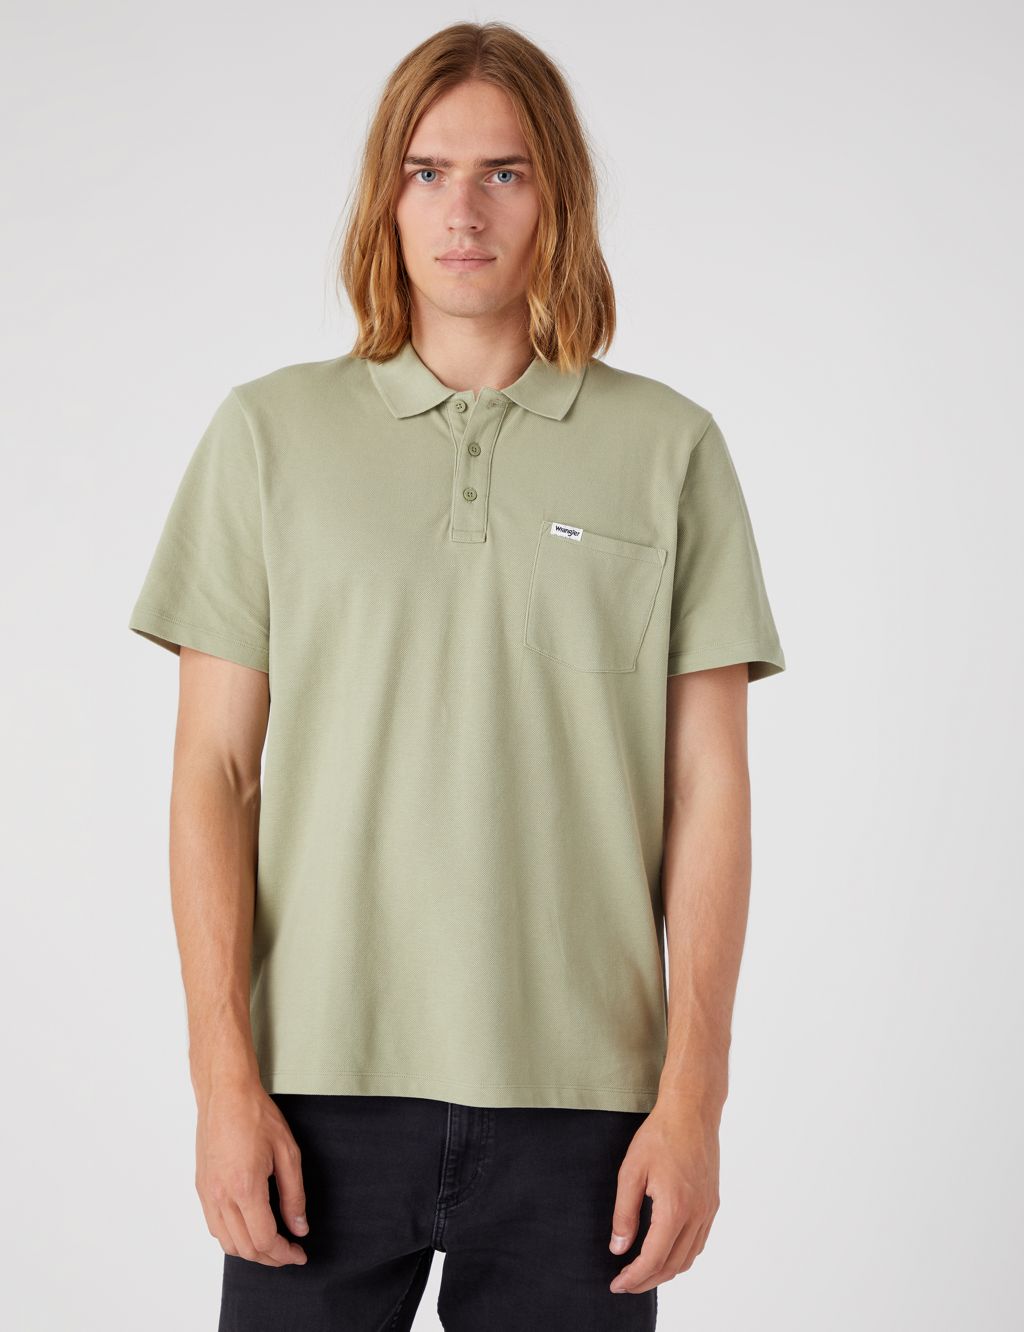 Relaxed Fit Pure Cotton Polo Shirt image 1